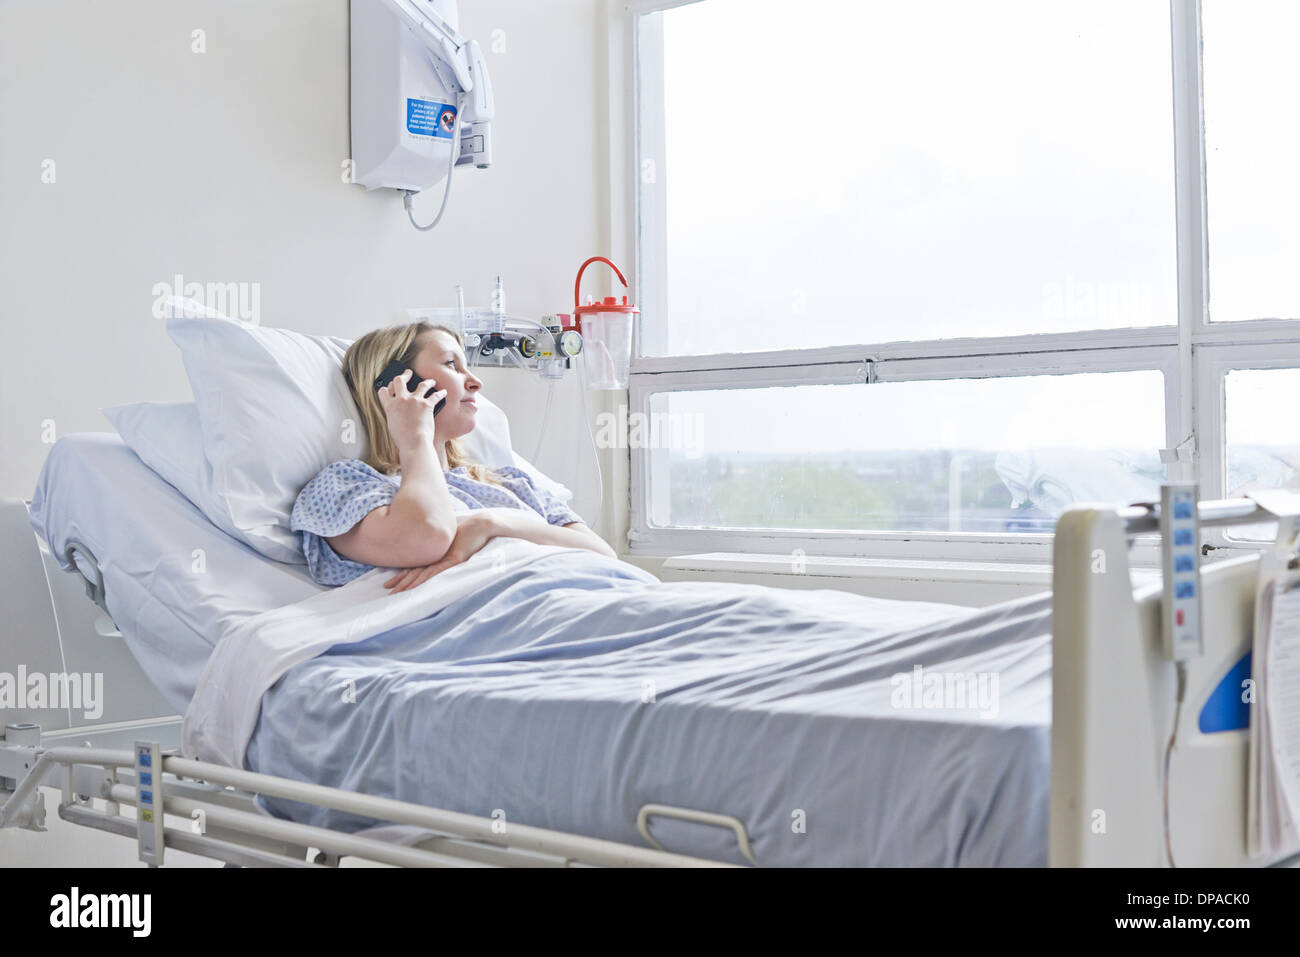 Patient lying on hospital bed on telephone call Stock Photo